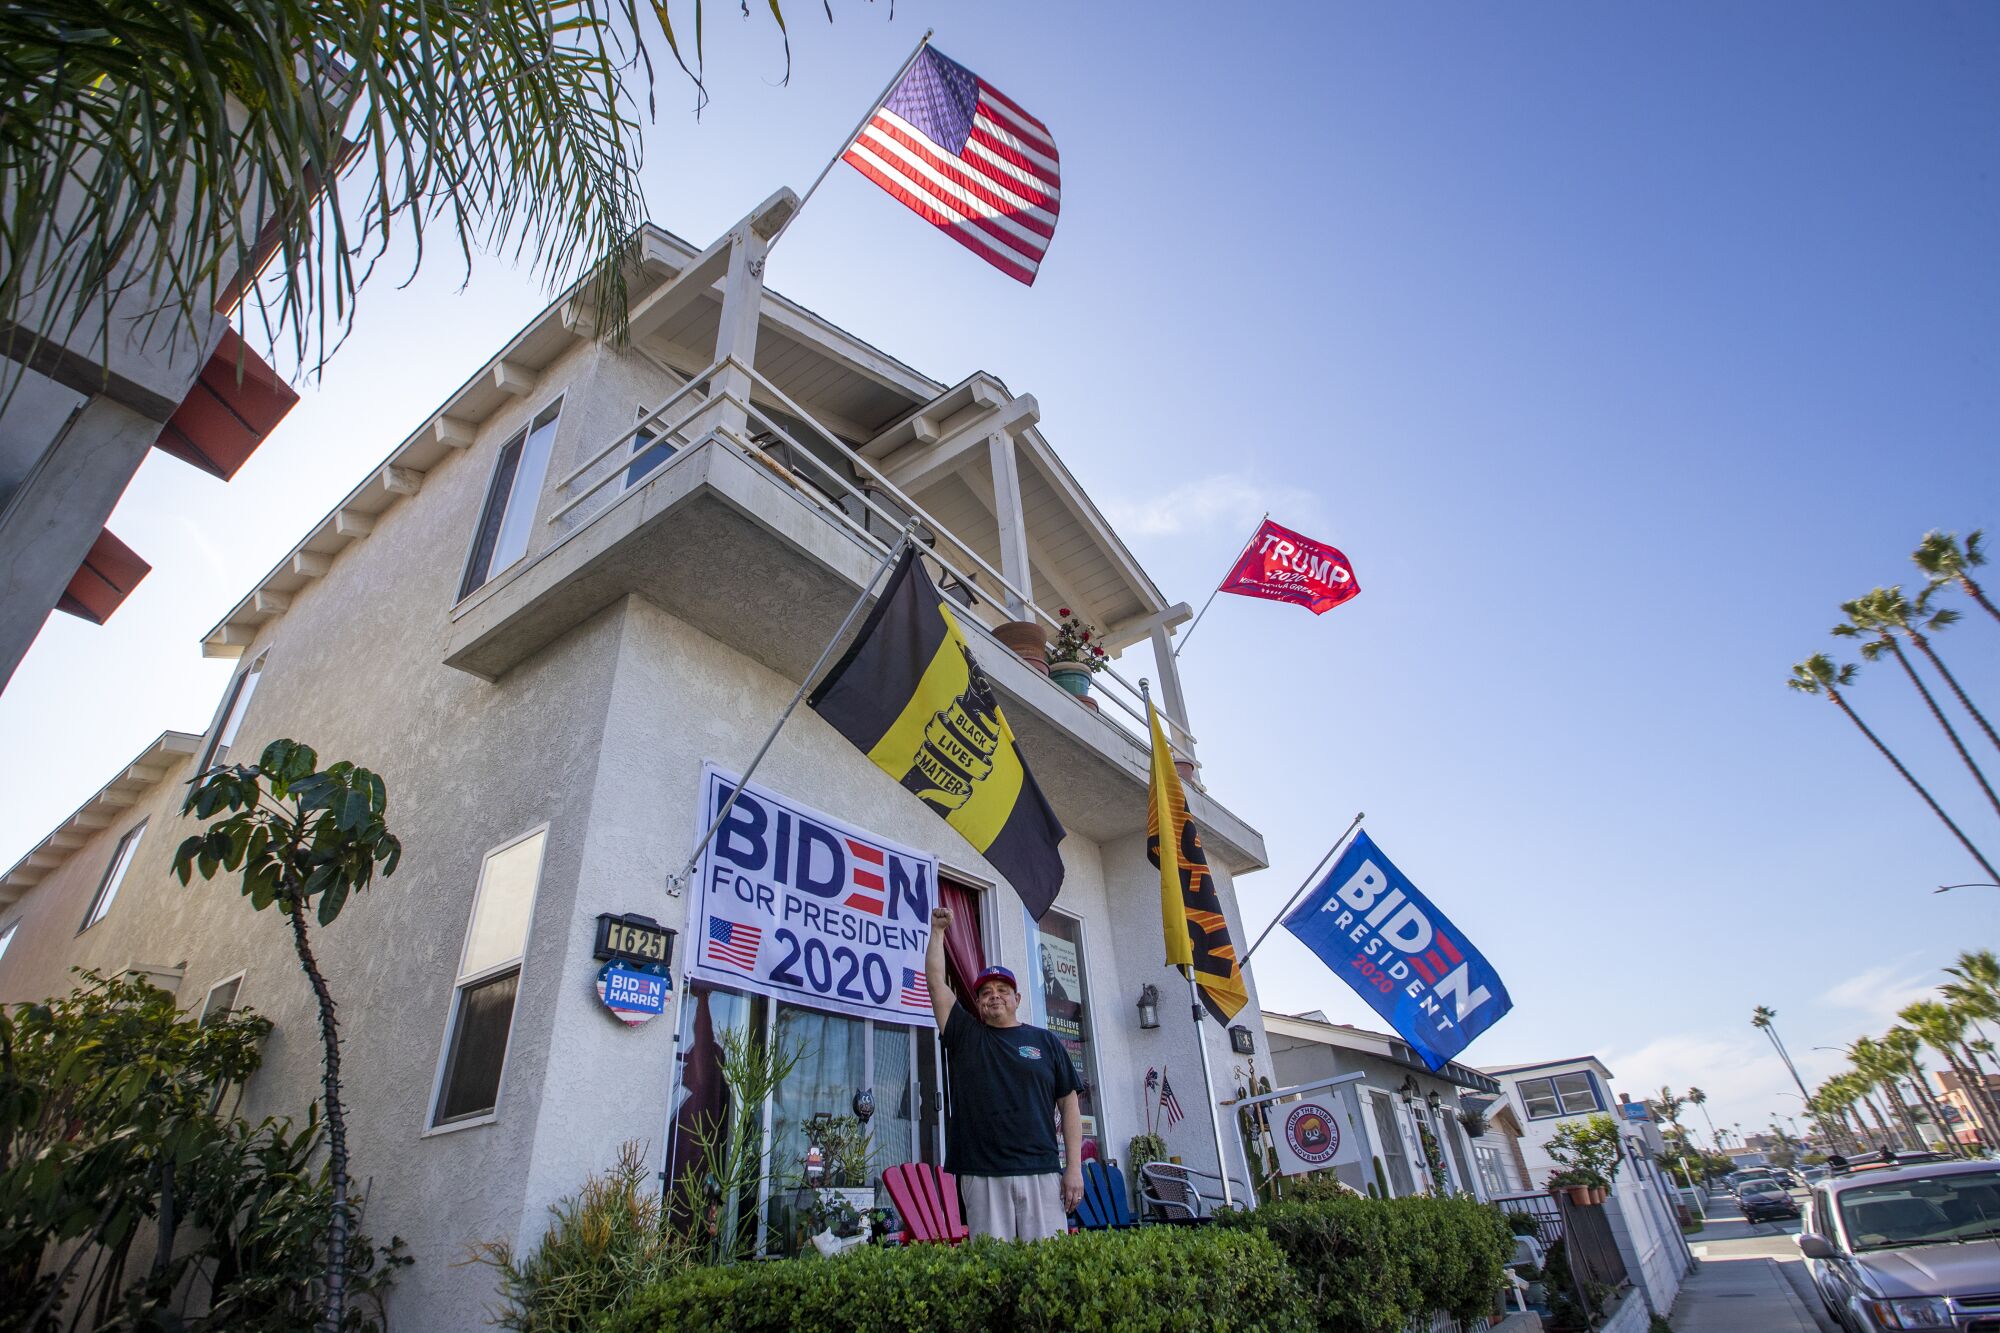 A Joe Biden supporter stands among his supportive flags in front of his home.